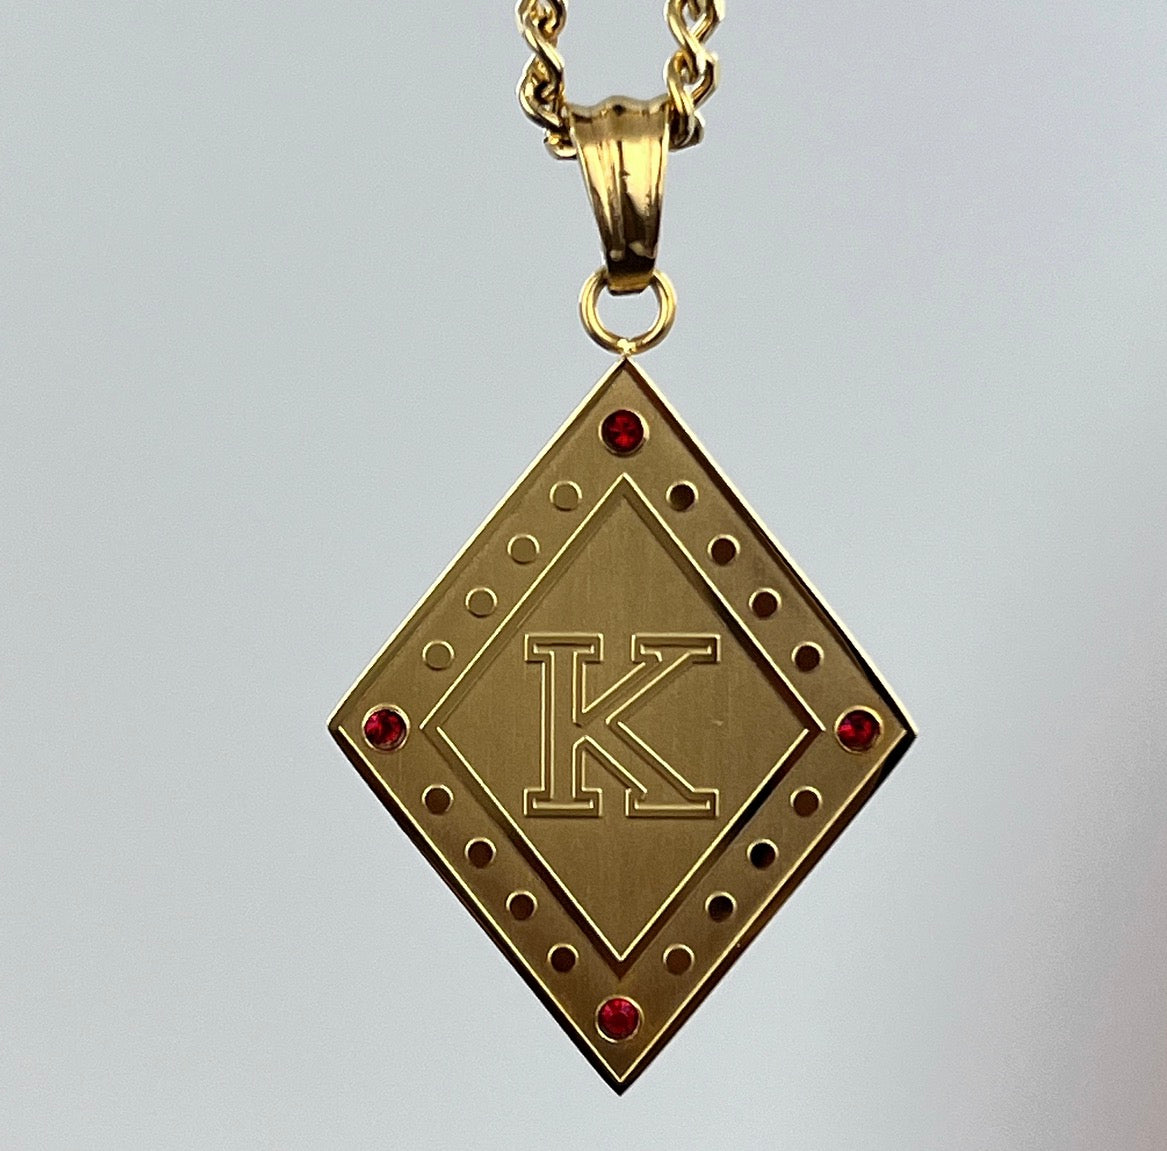 A beyond stunning Kappa Alpha Psi necklace and charm made with 24k solid gold Plated. This pendant is made to last for generations and generations, perfect for that special Kappa Alpha Psi member. The ultimate gift to show off your fraternity pride is here!  • Official Kappa Alpha Psi Licensed Product: passed through examination and requirements by the Fraternity as a whole.